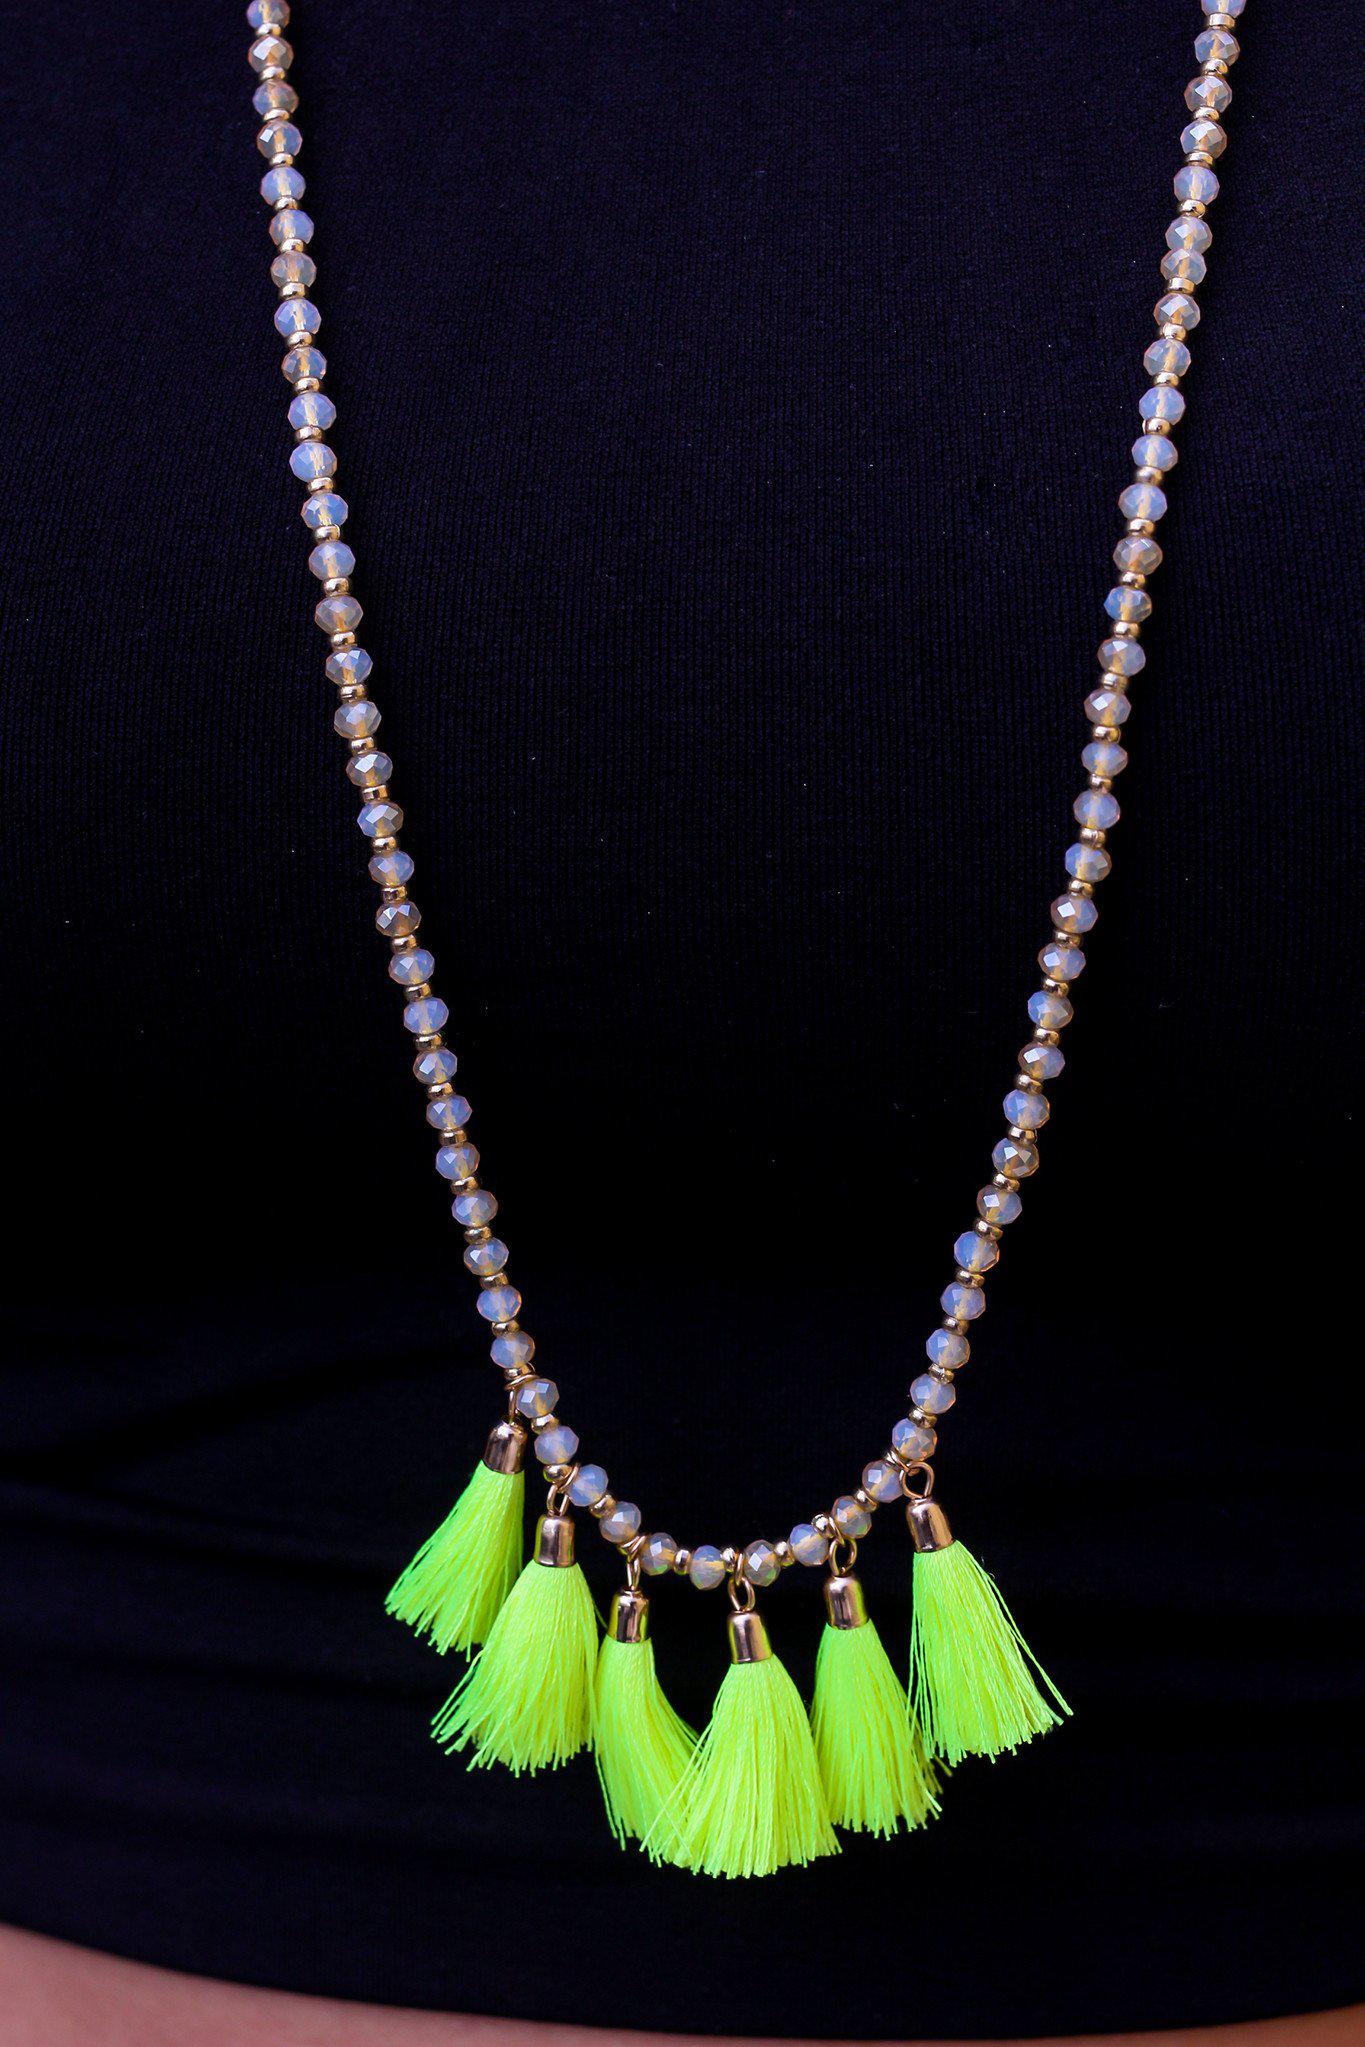 Neon Yellow Tassel Necklace with Glass Beads